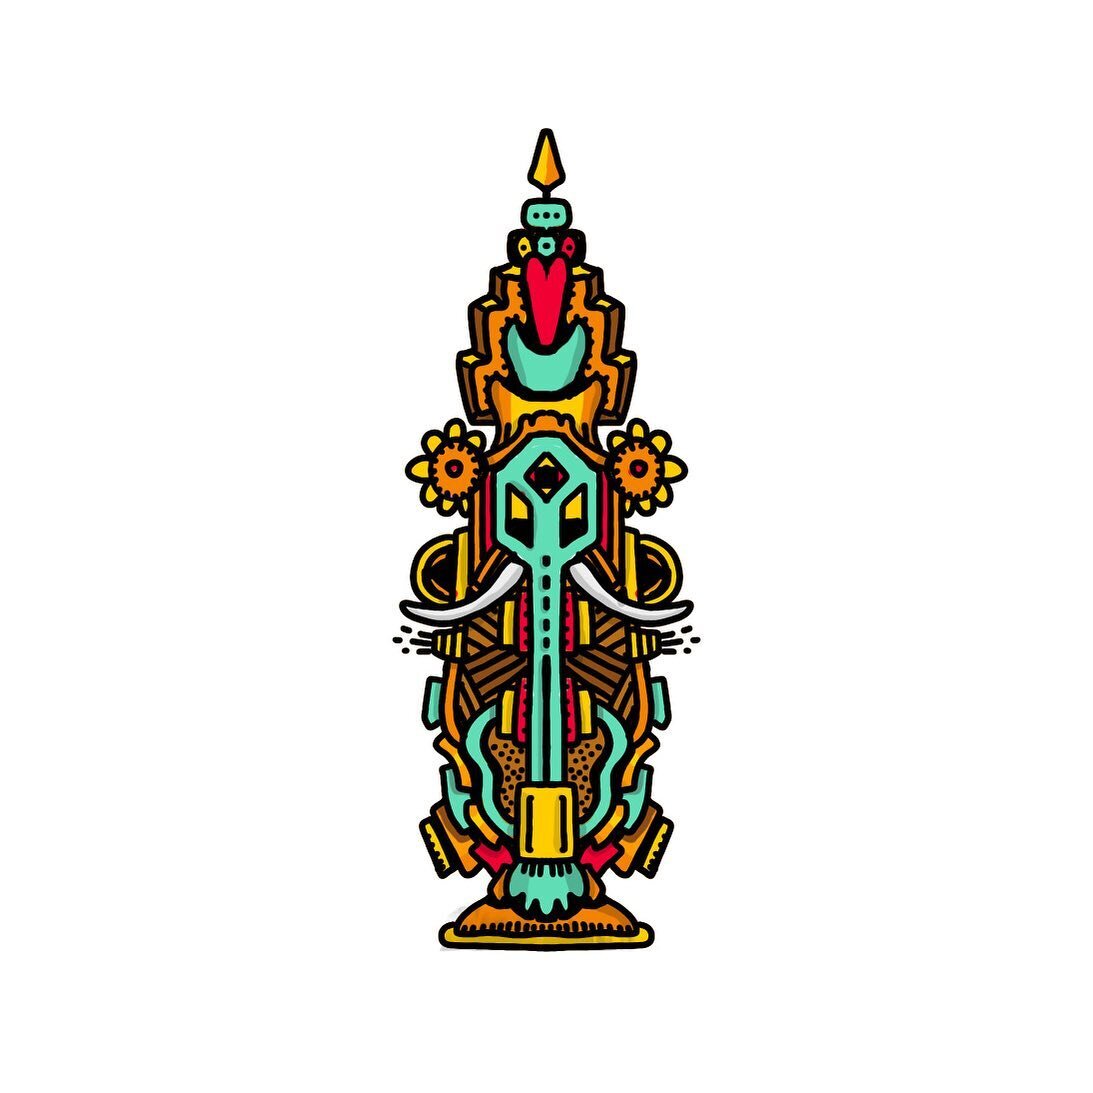 What about this one? #totem #design #illustration